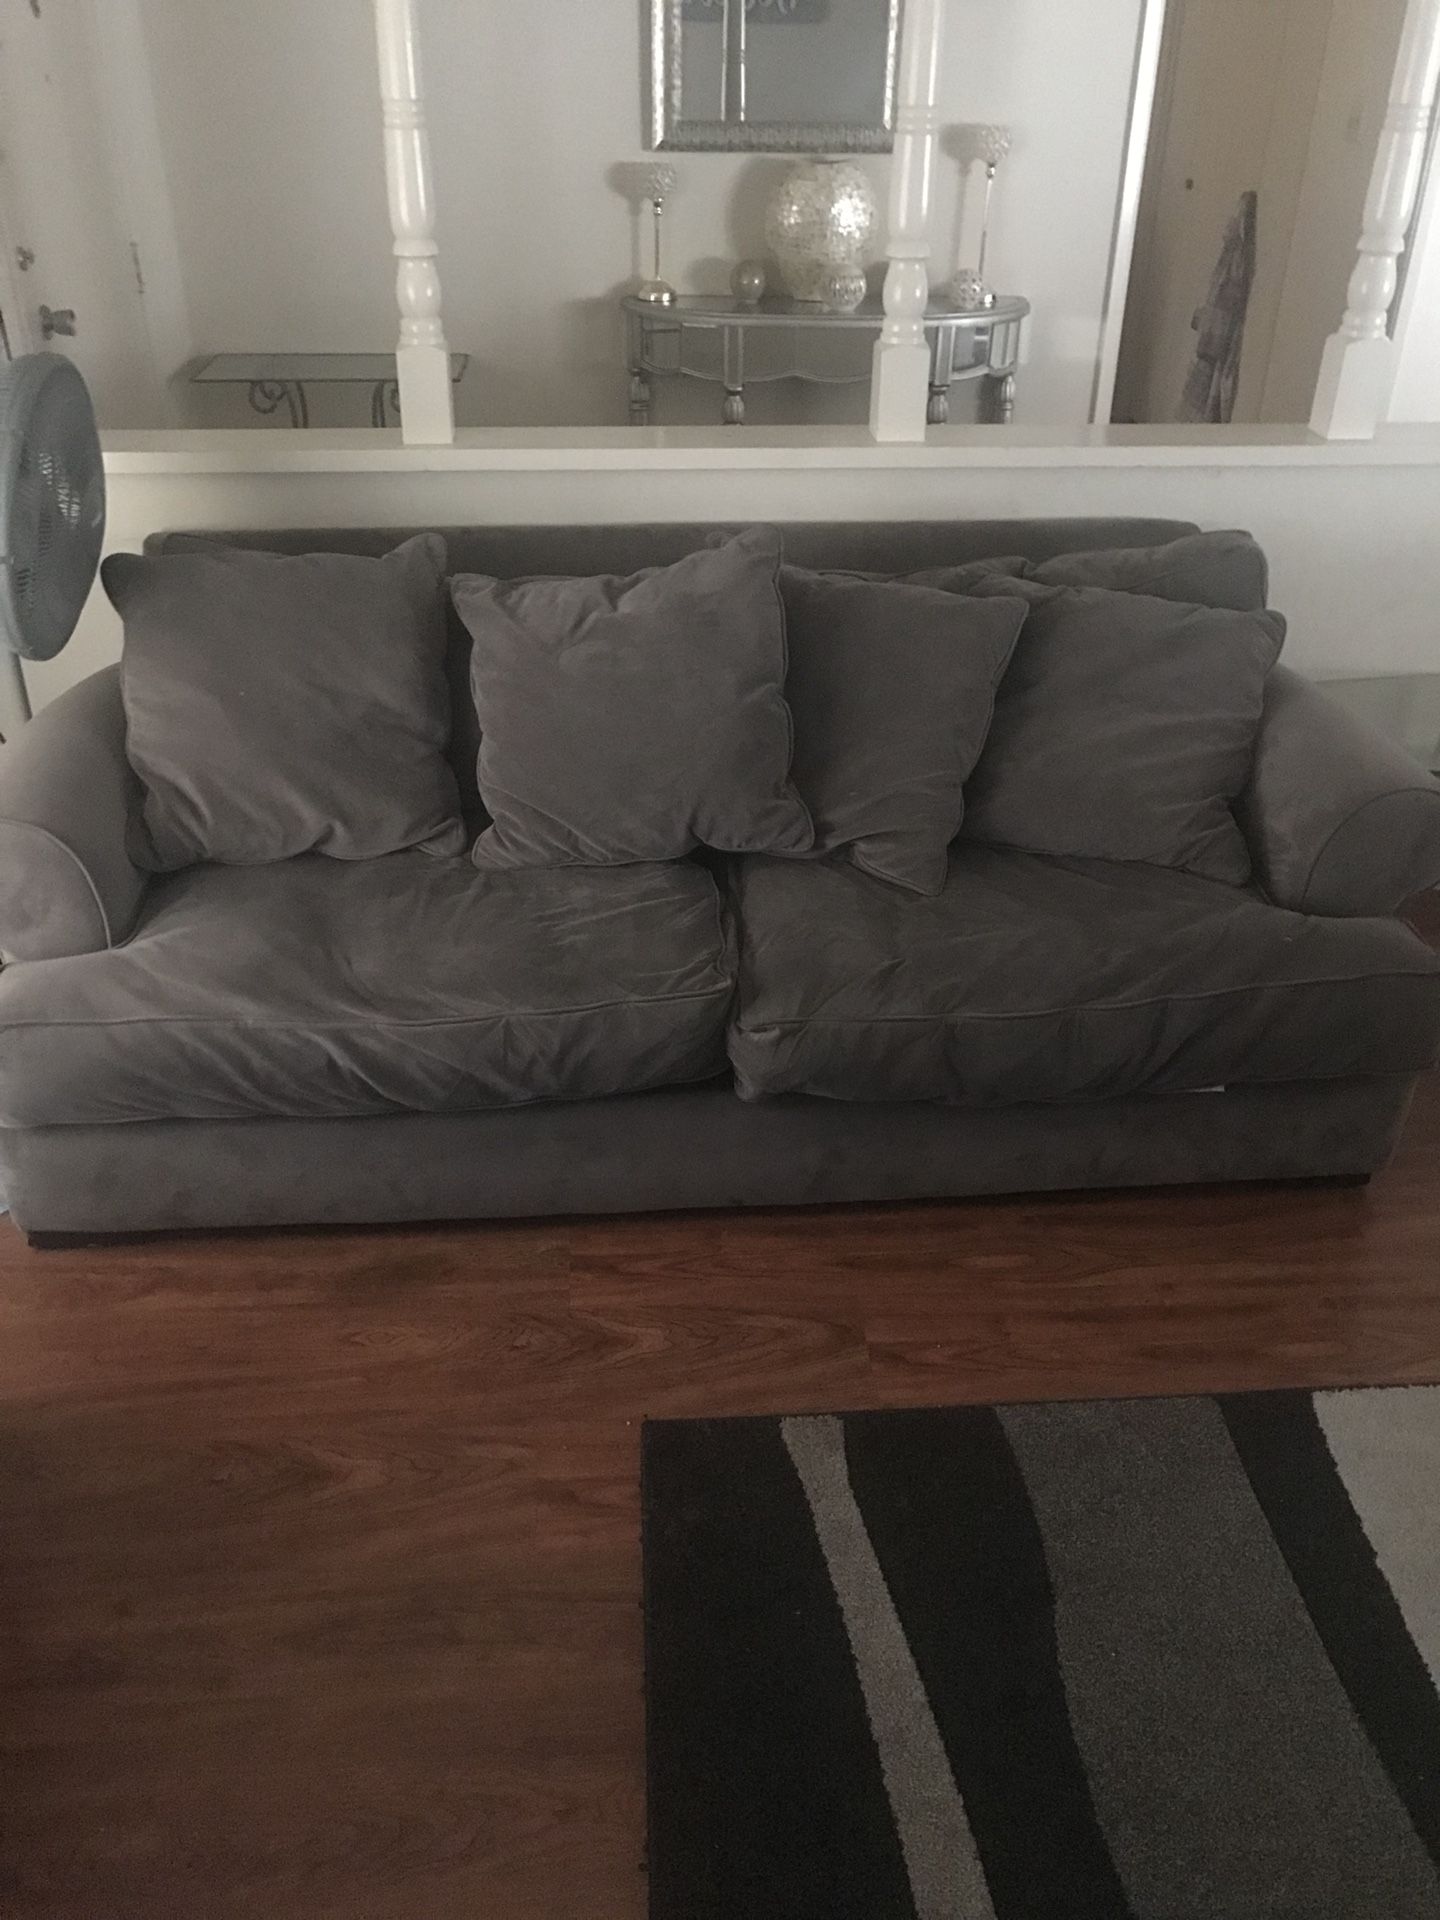 Grey couch